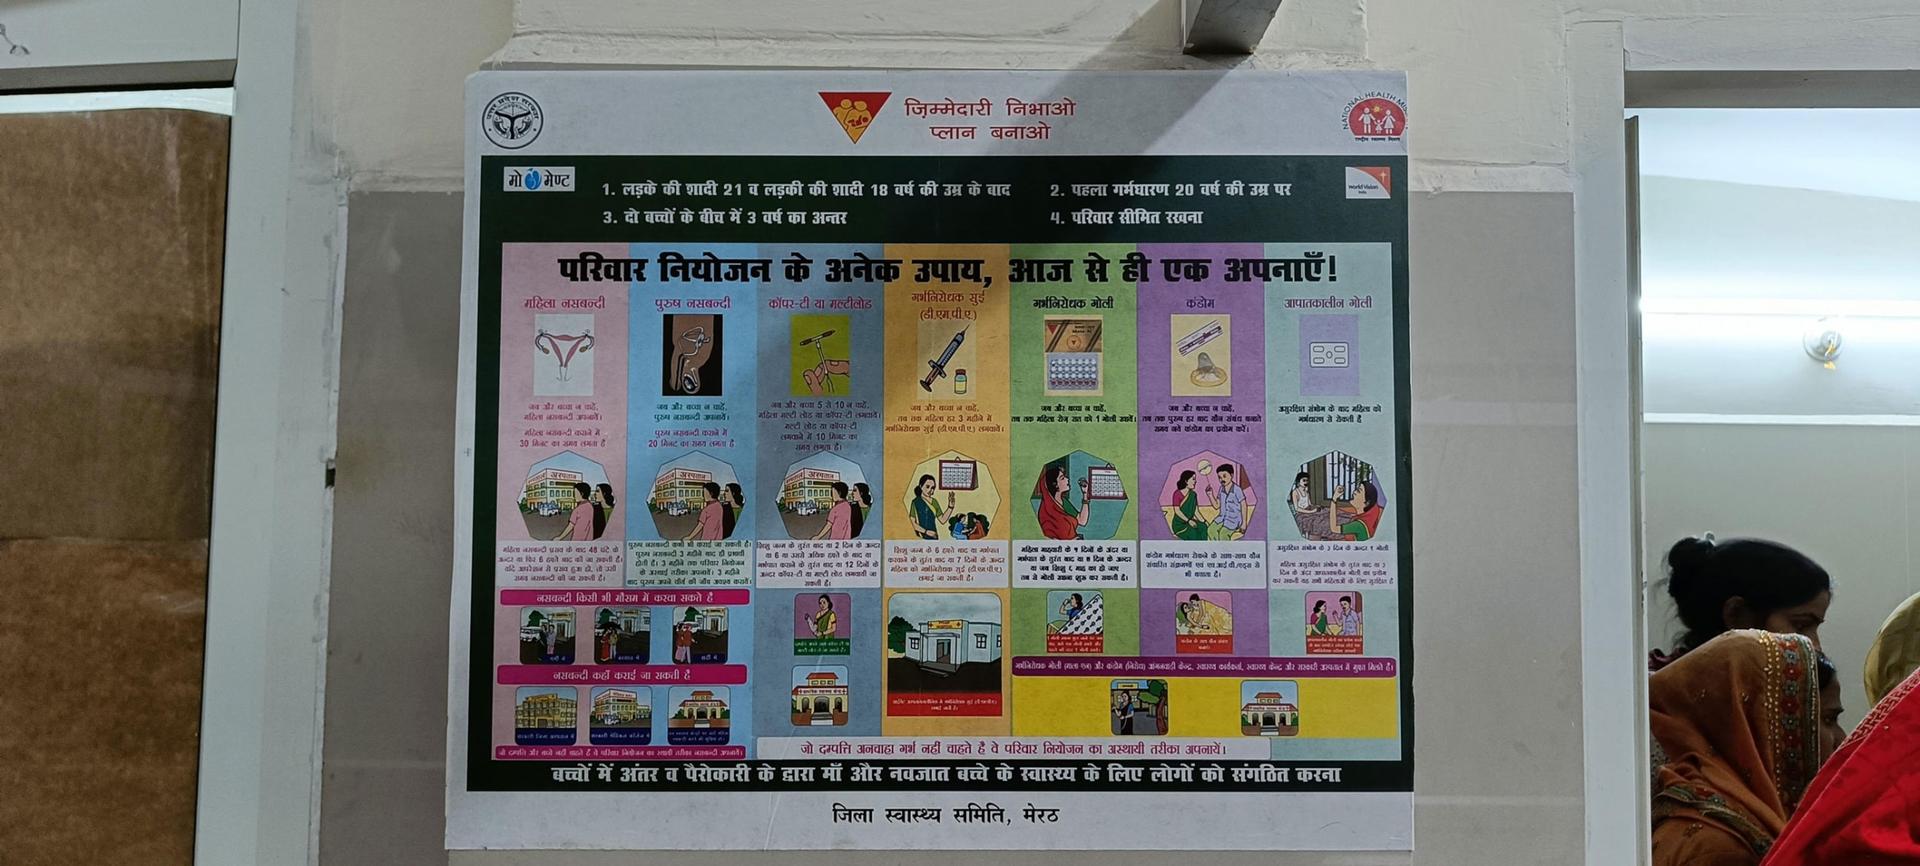 Posters and flyers about family planning adorn the walls at the district women's hospital in Meerut, Uttar Pradesh, India's most populous state.